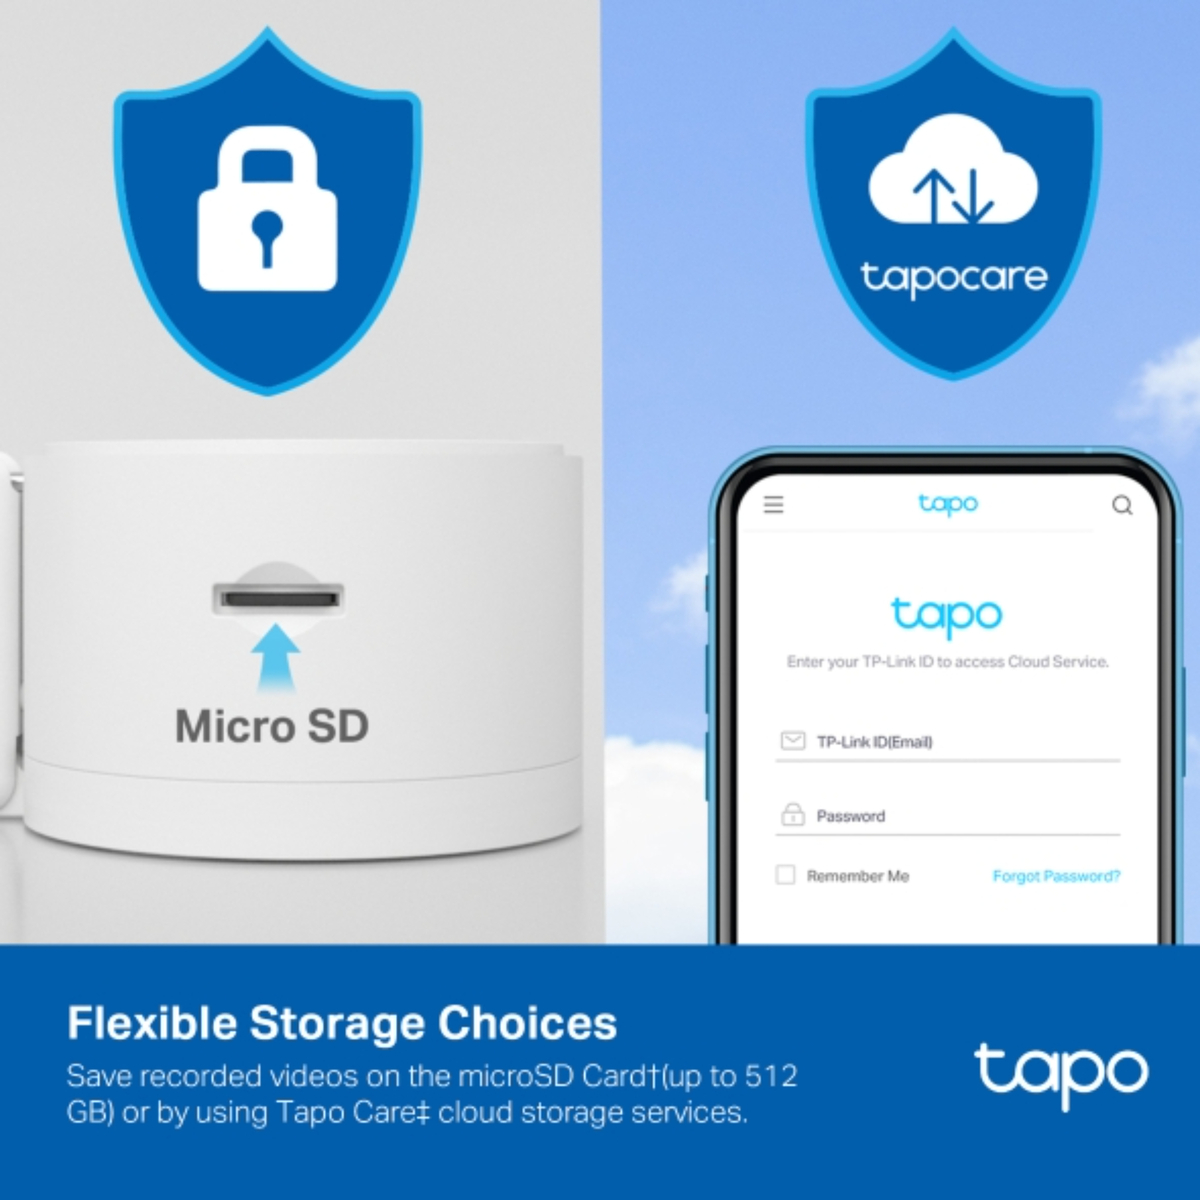 TP-Link Tapo C125 AI Home Security Wi-Fi Camera